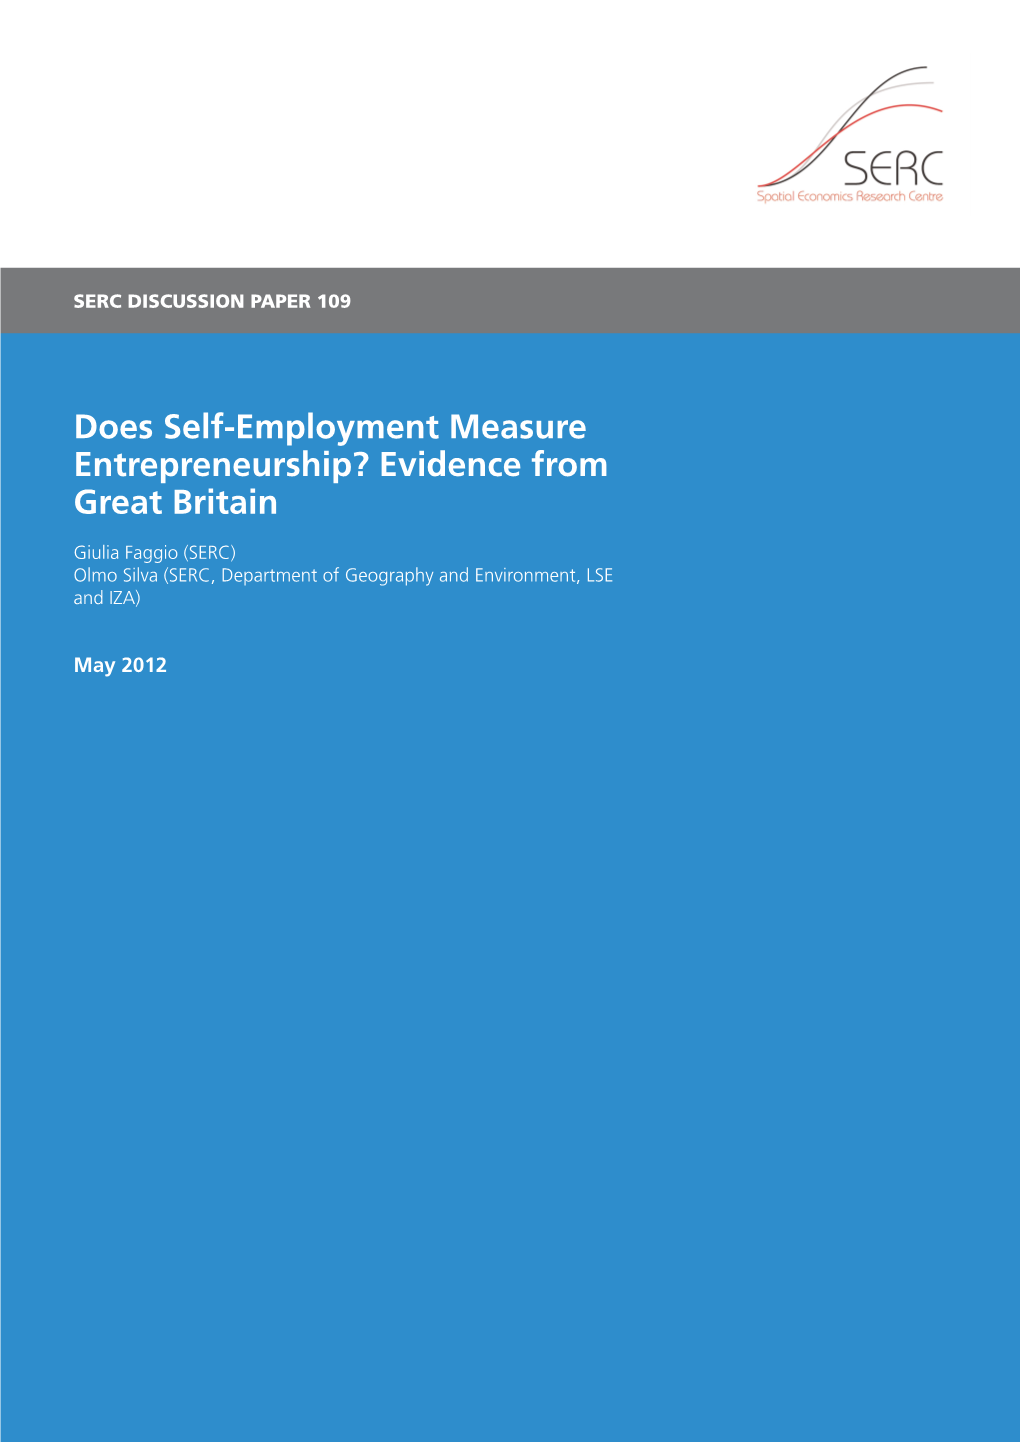 Does Self-Employment Measure Entrepreneurship? Evidence from Great Britain